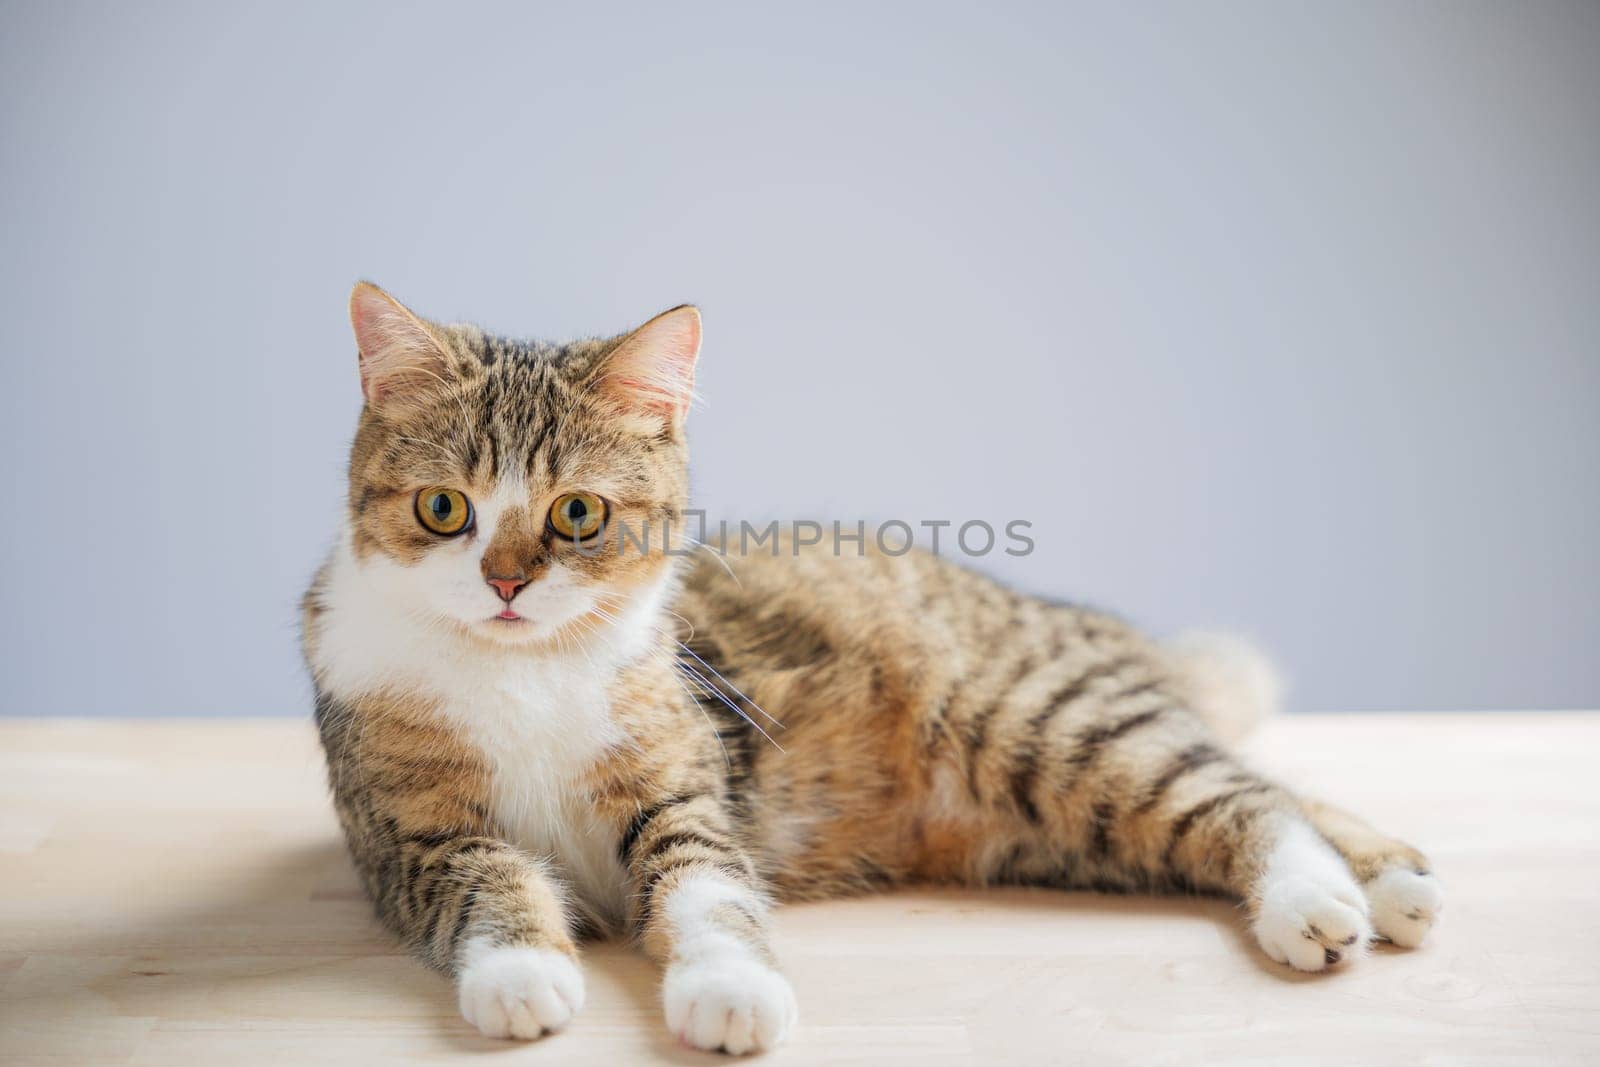 The isolated image captures a cheerful little grey Scottish Fold cat on a white background, standing with a straight tail, showcasing its playful and endearing nature.